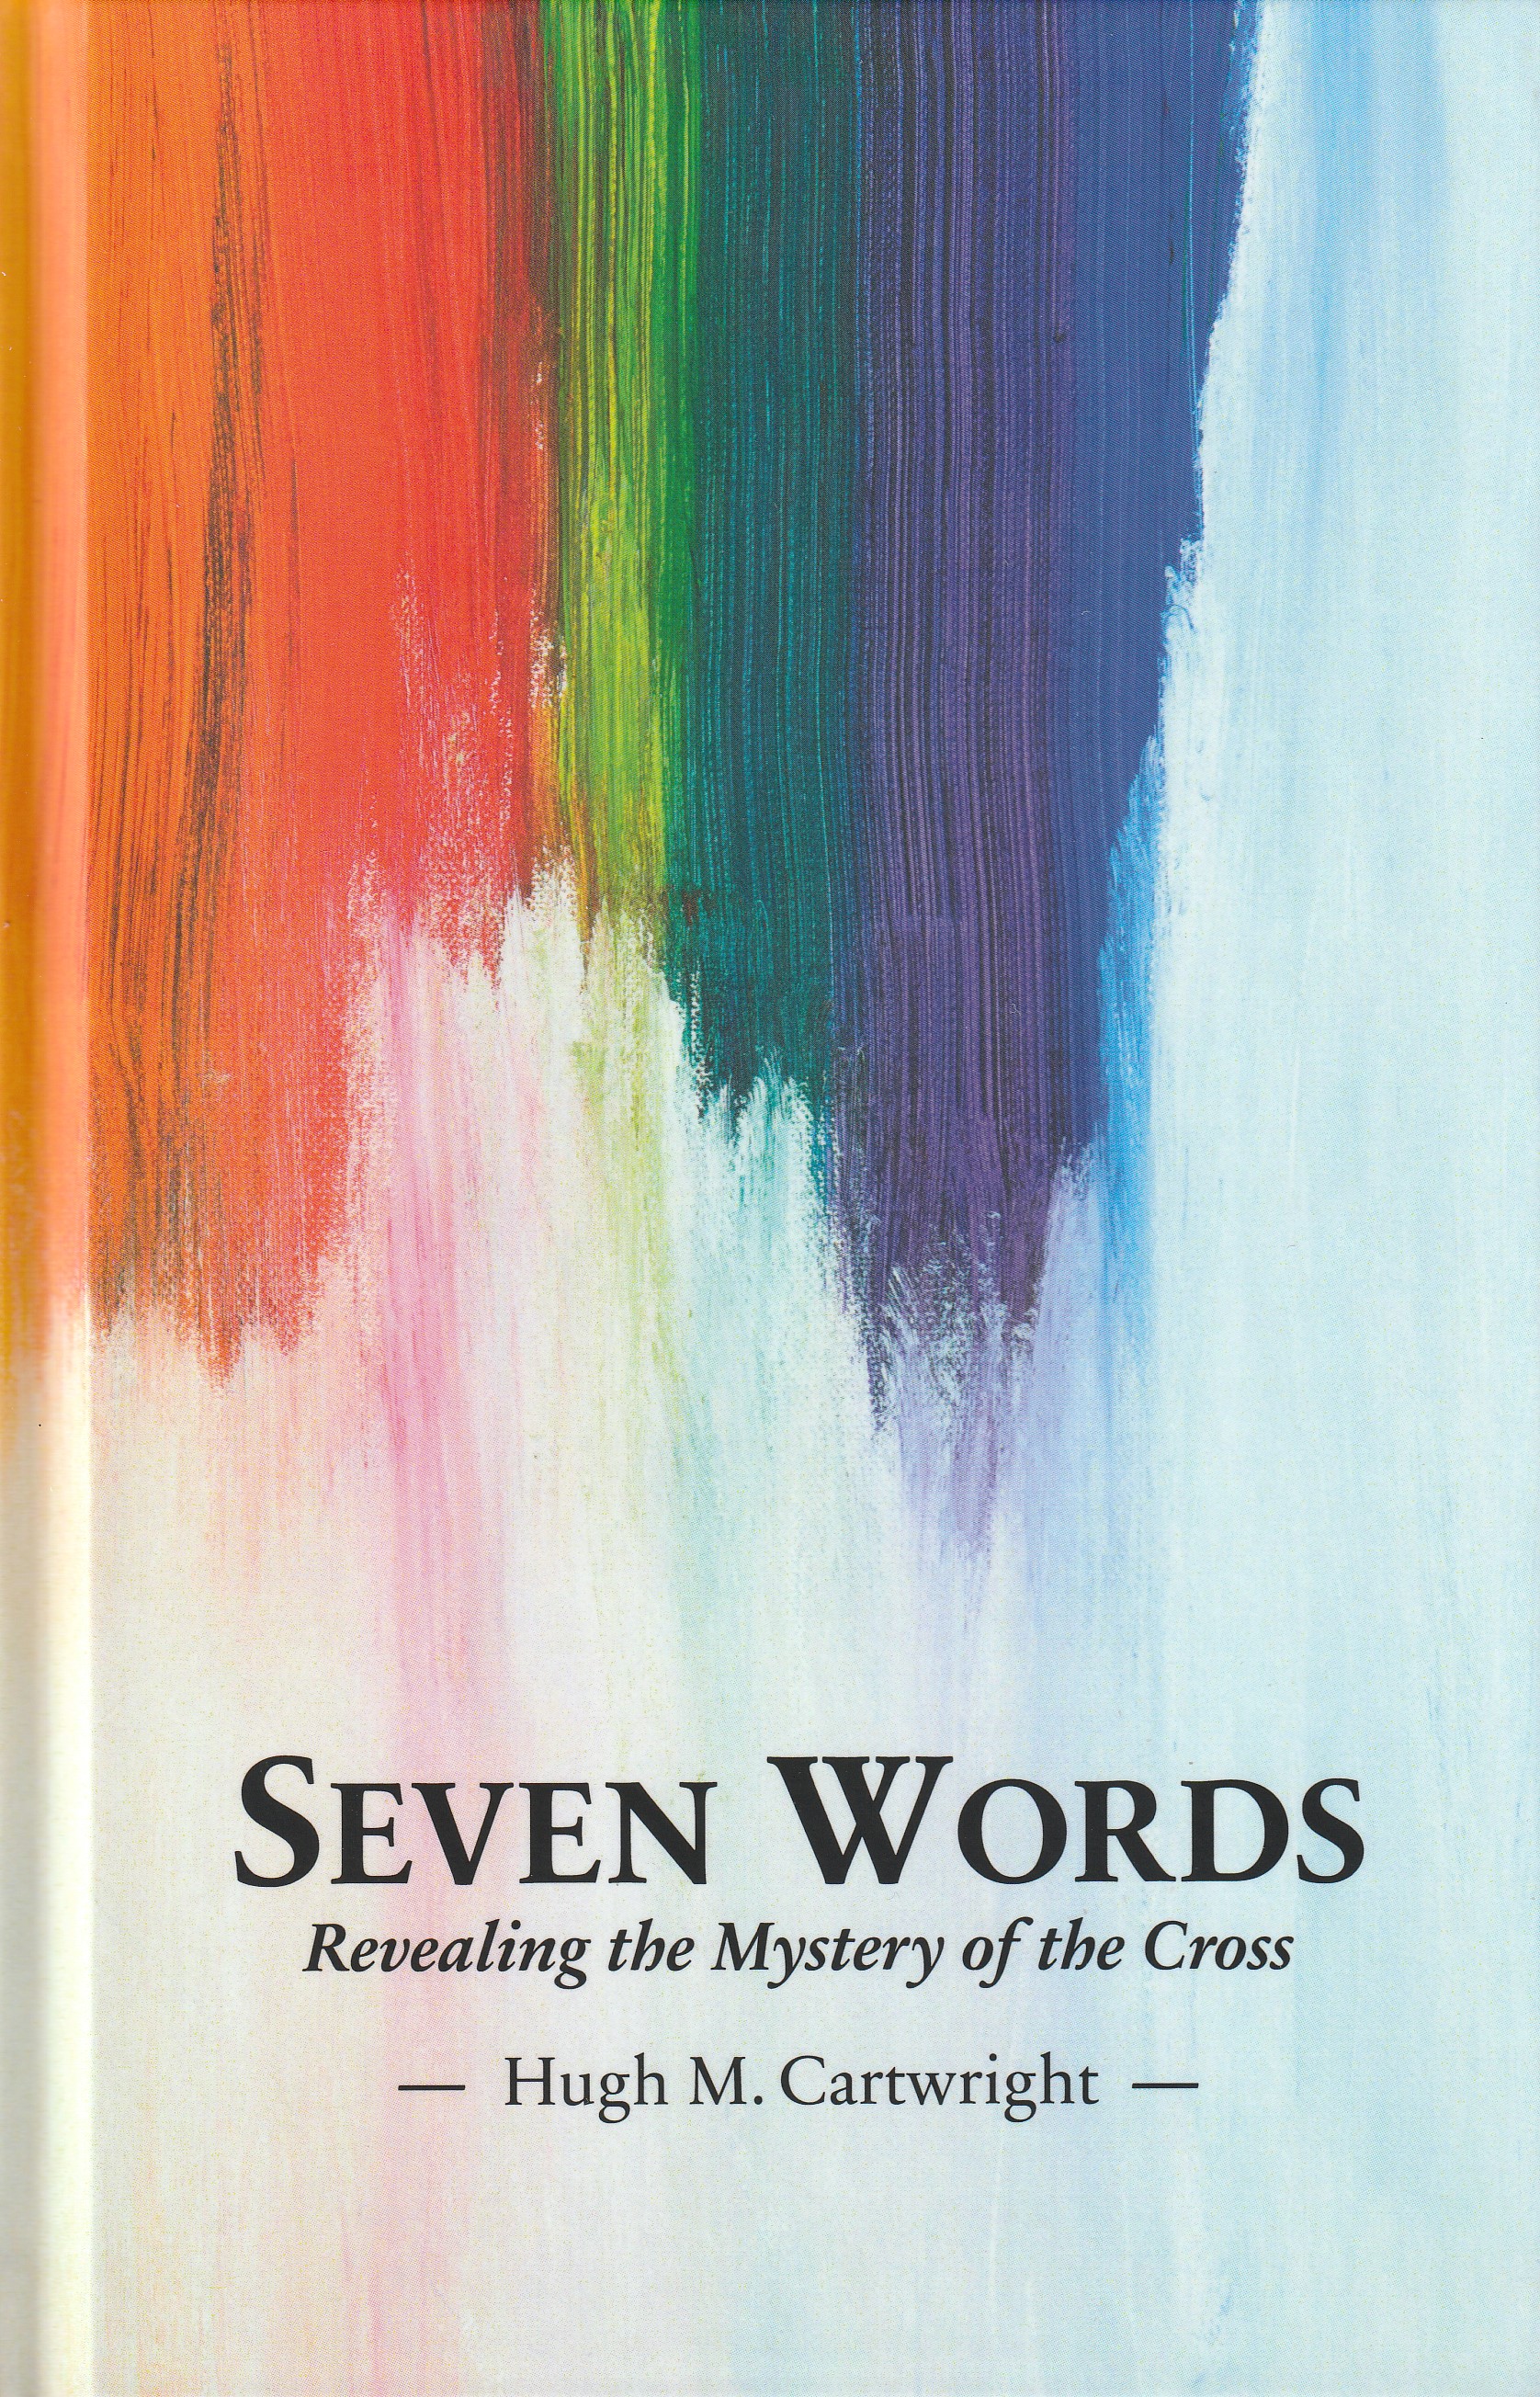 Seven Words: Revealing the Mystery of the Cross